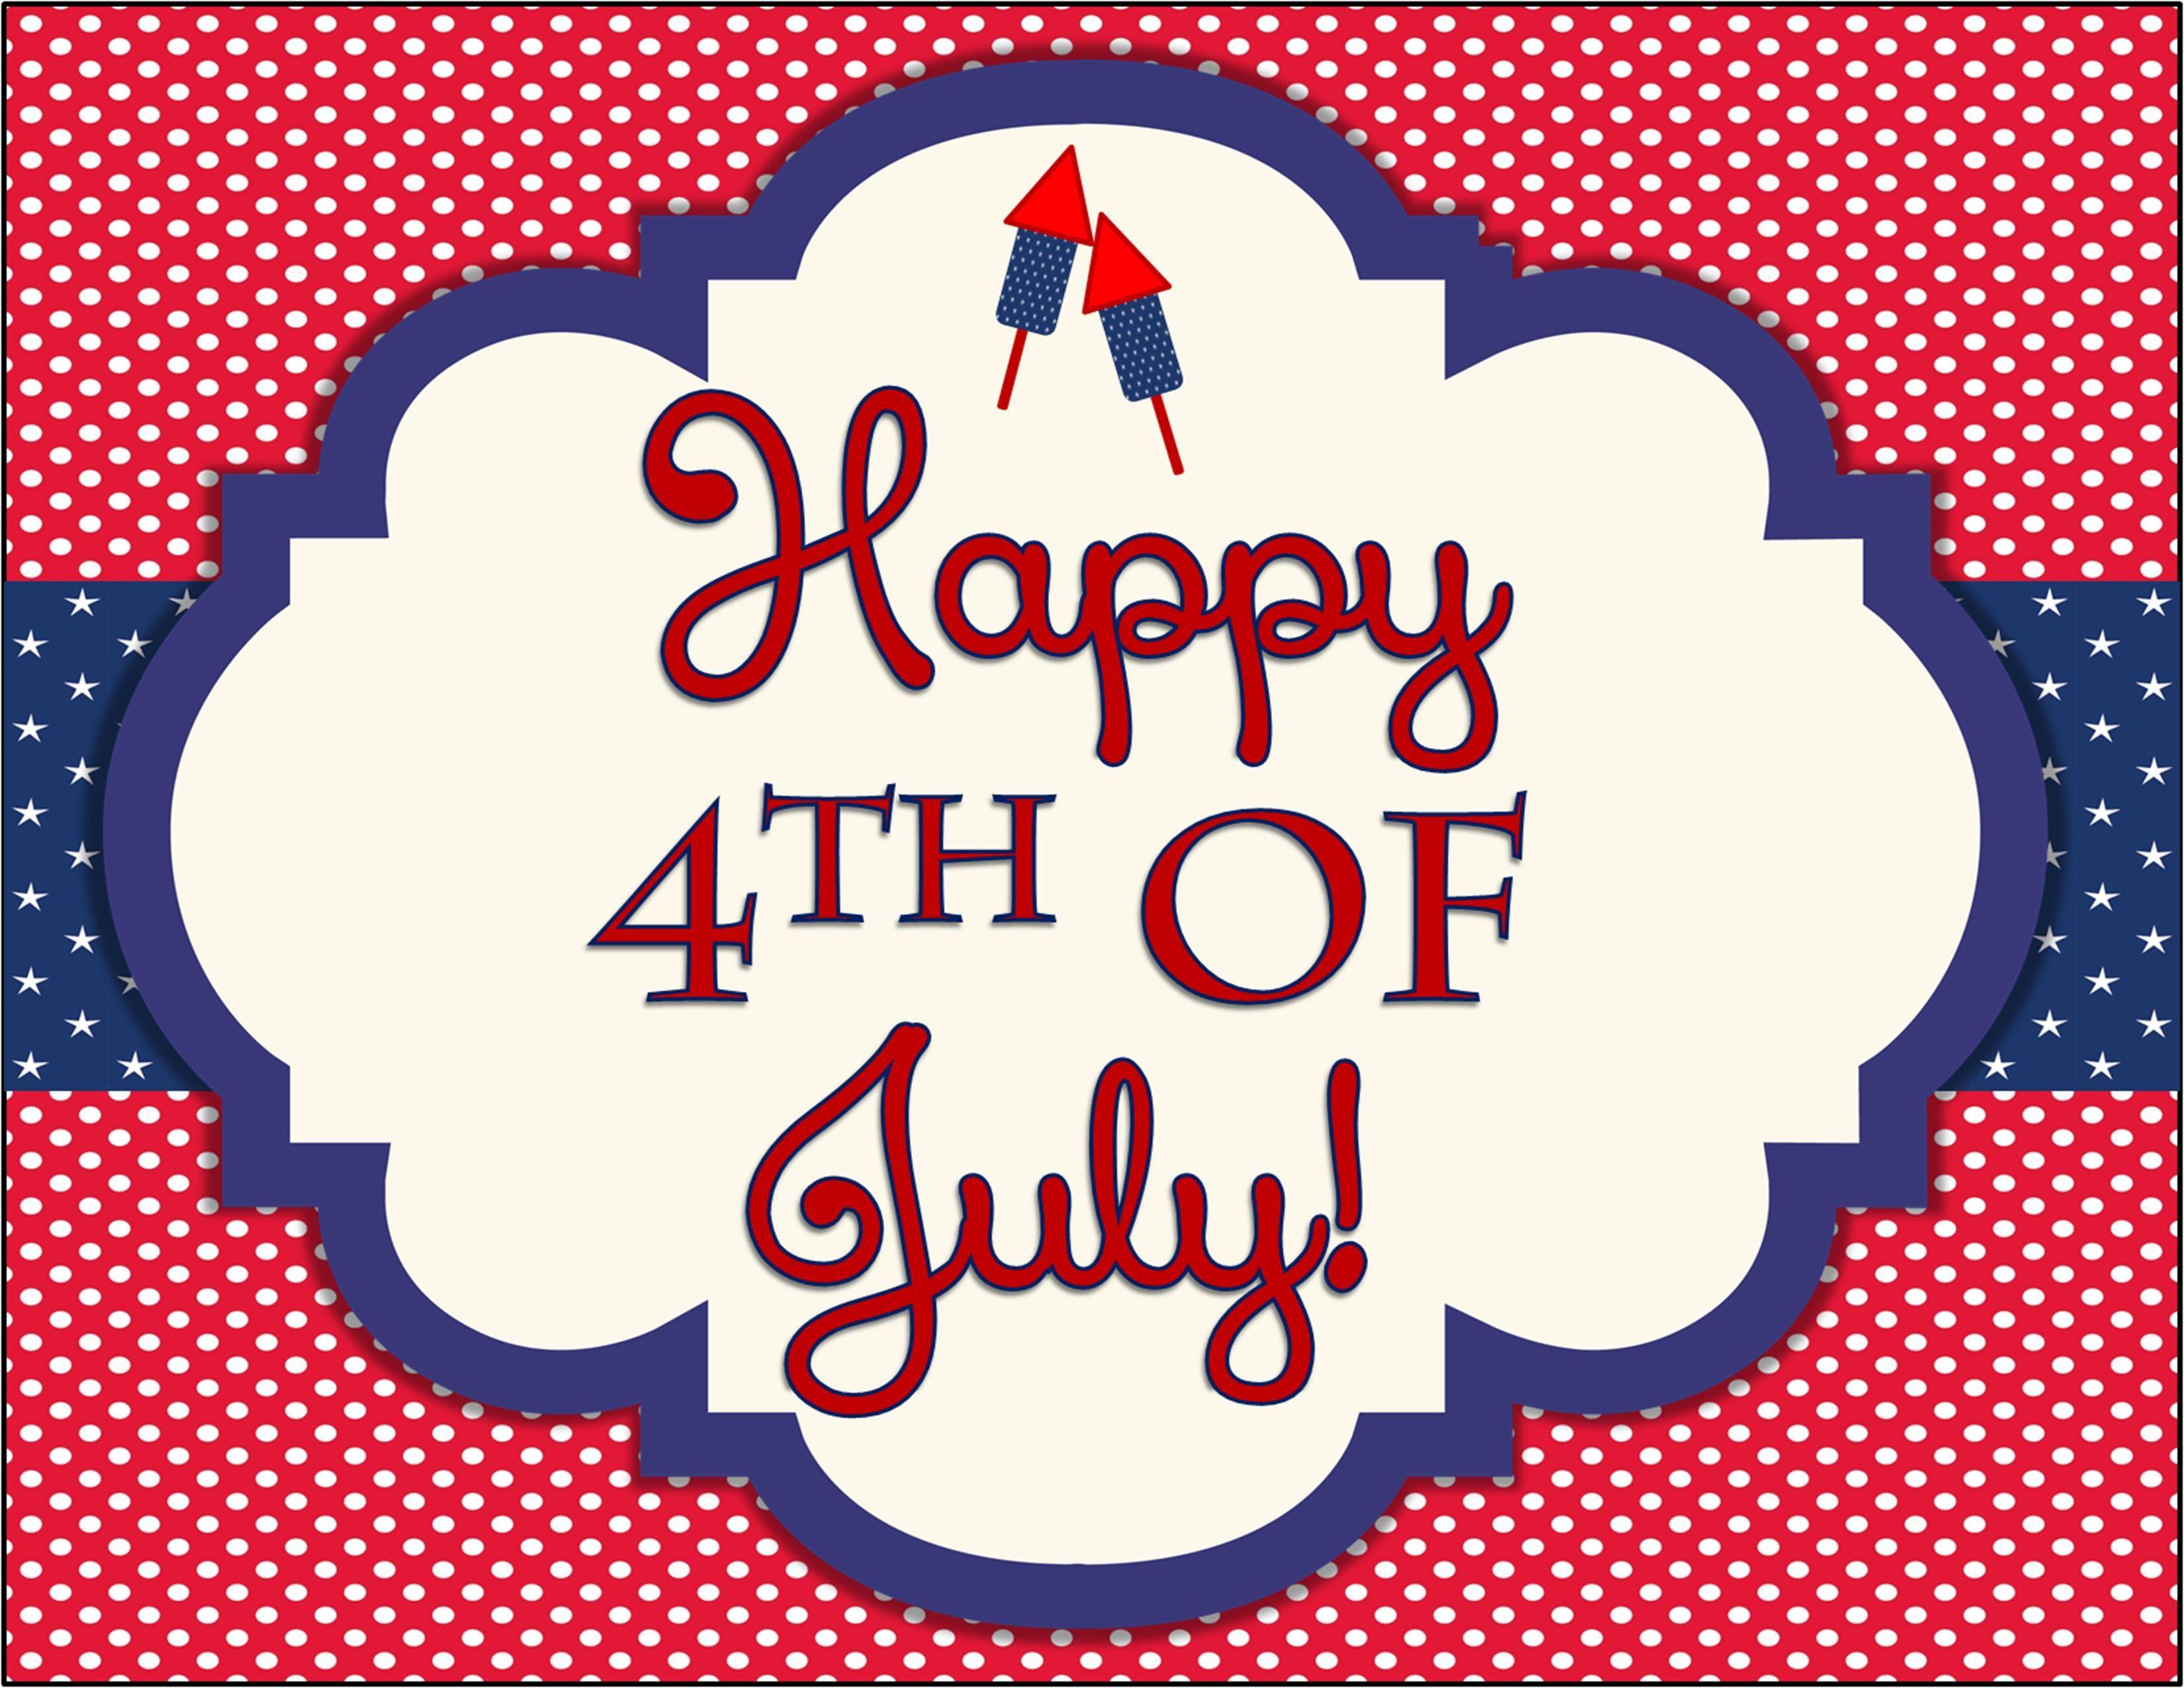 Happy 4th Of July Image 2019: Fourth Of July Picture Photo Wallpaper